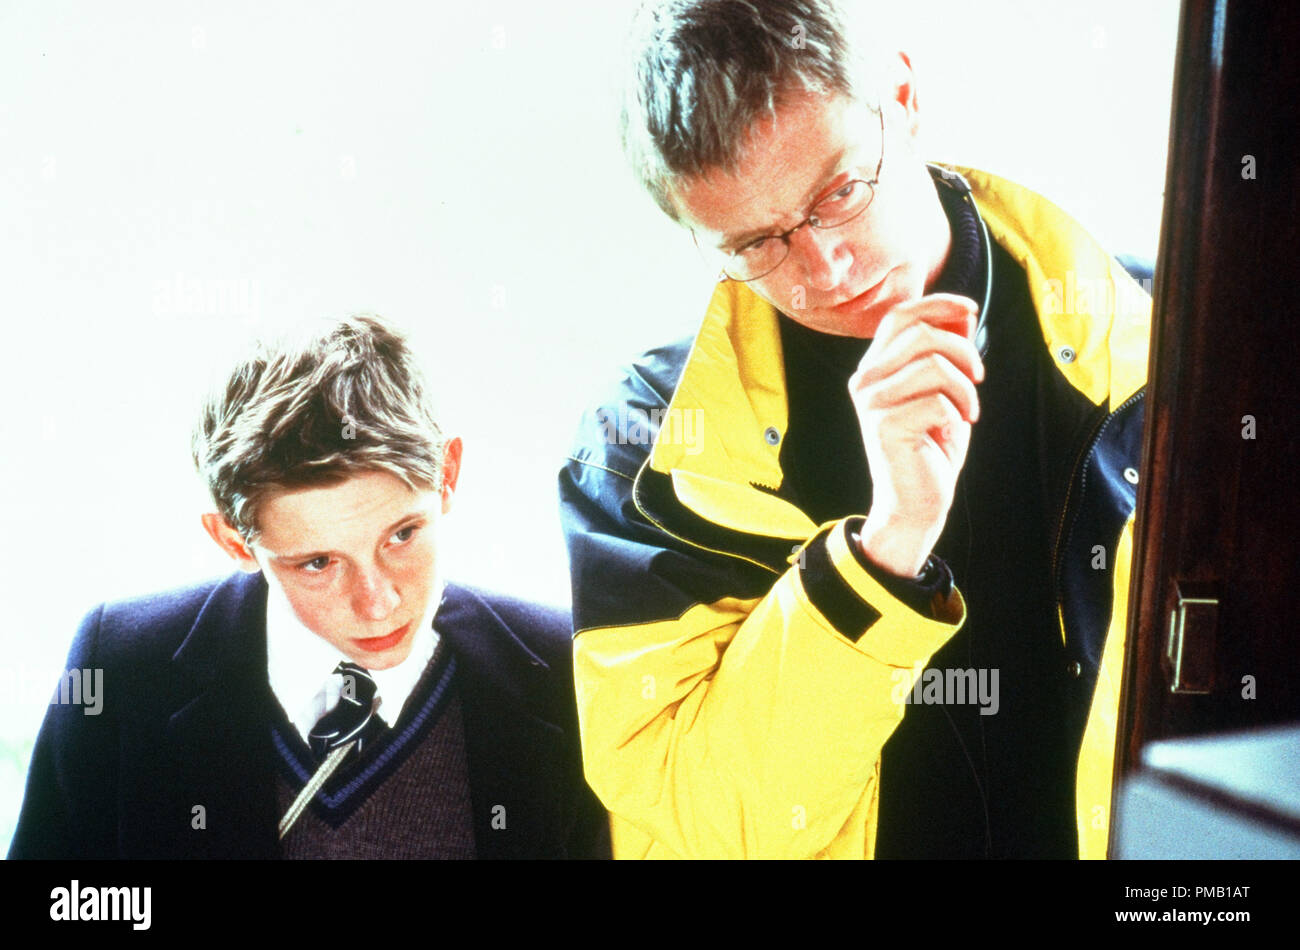 Jamie Bell and Director Stephen Daldry, 'Billy Elliot' (2000) Universal File Reference # 33018 075THA  For Editorial Use Only -  All Rights Reserved Stock Photo